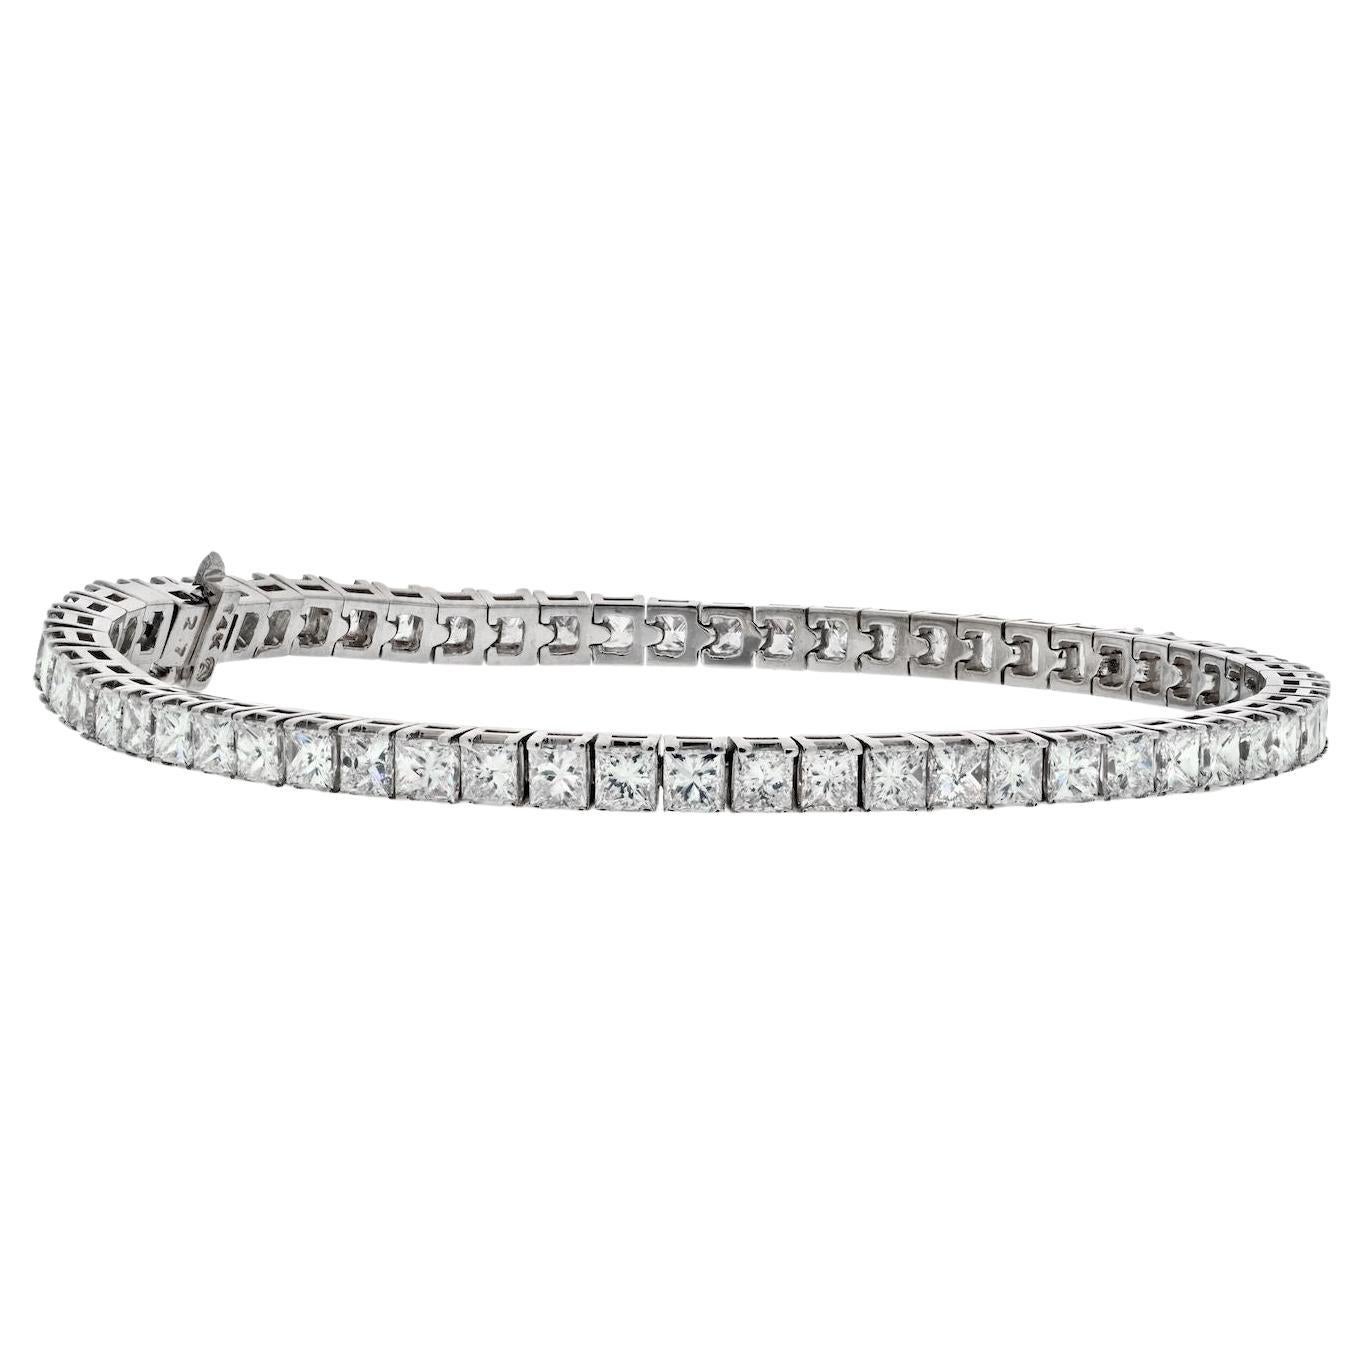 Classic diamond bracelet with princess cut diamonds mounted in 14k white gold. Embrace your wrist with this lovely sparkle of princess cut diamonds, elegant and delicate yet beautiful as a gift for your loved one. 
Length: 7 inch.
Color: F-G